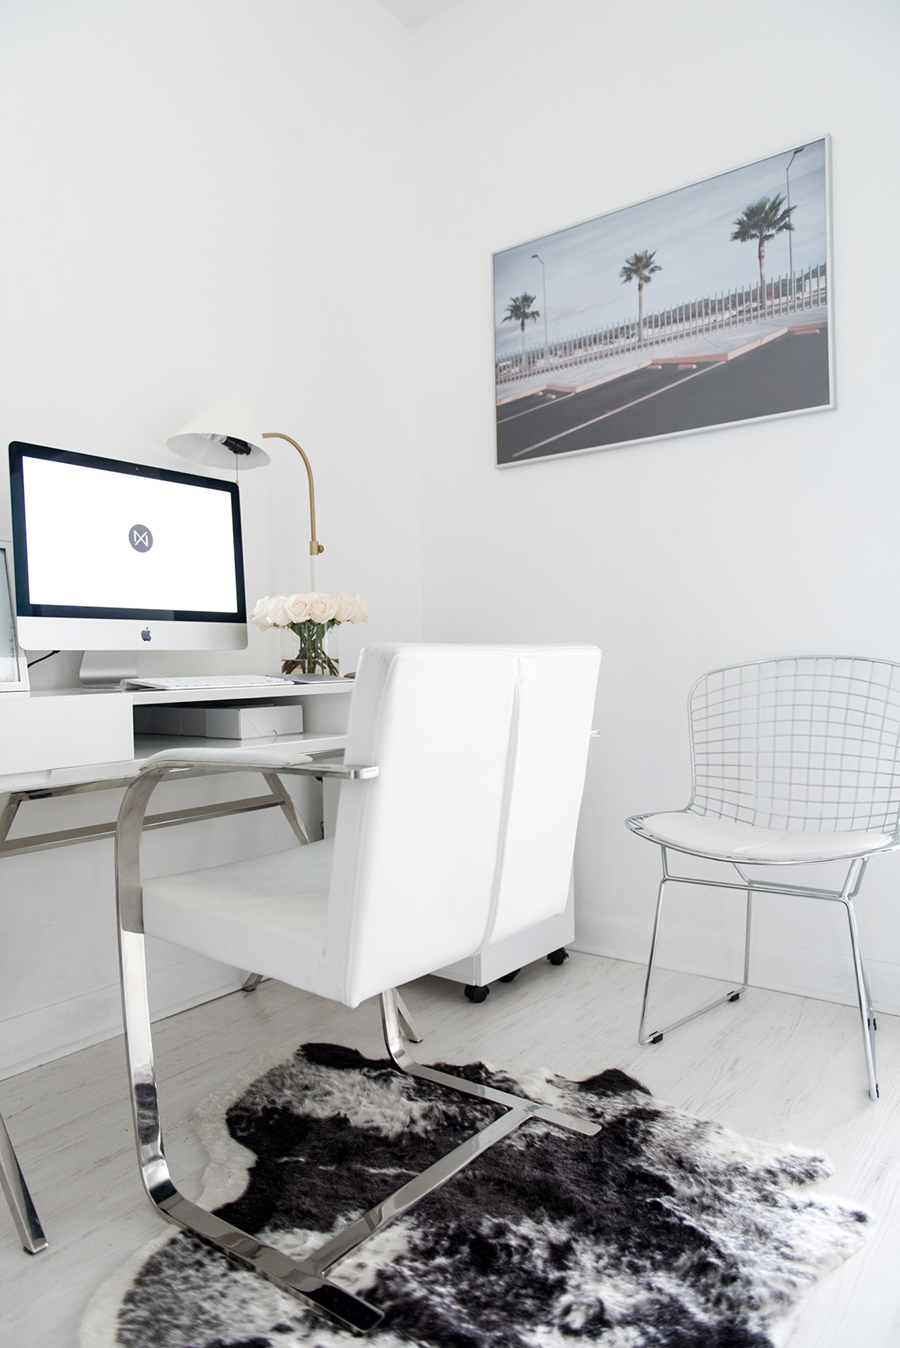 home office reveal blogger kayla seah not your standard pretty stylish chic white decor black  clean simple modern small space workspace desk inspiration fashion style work shelving structube west elm